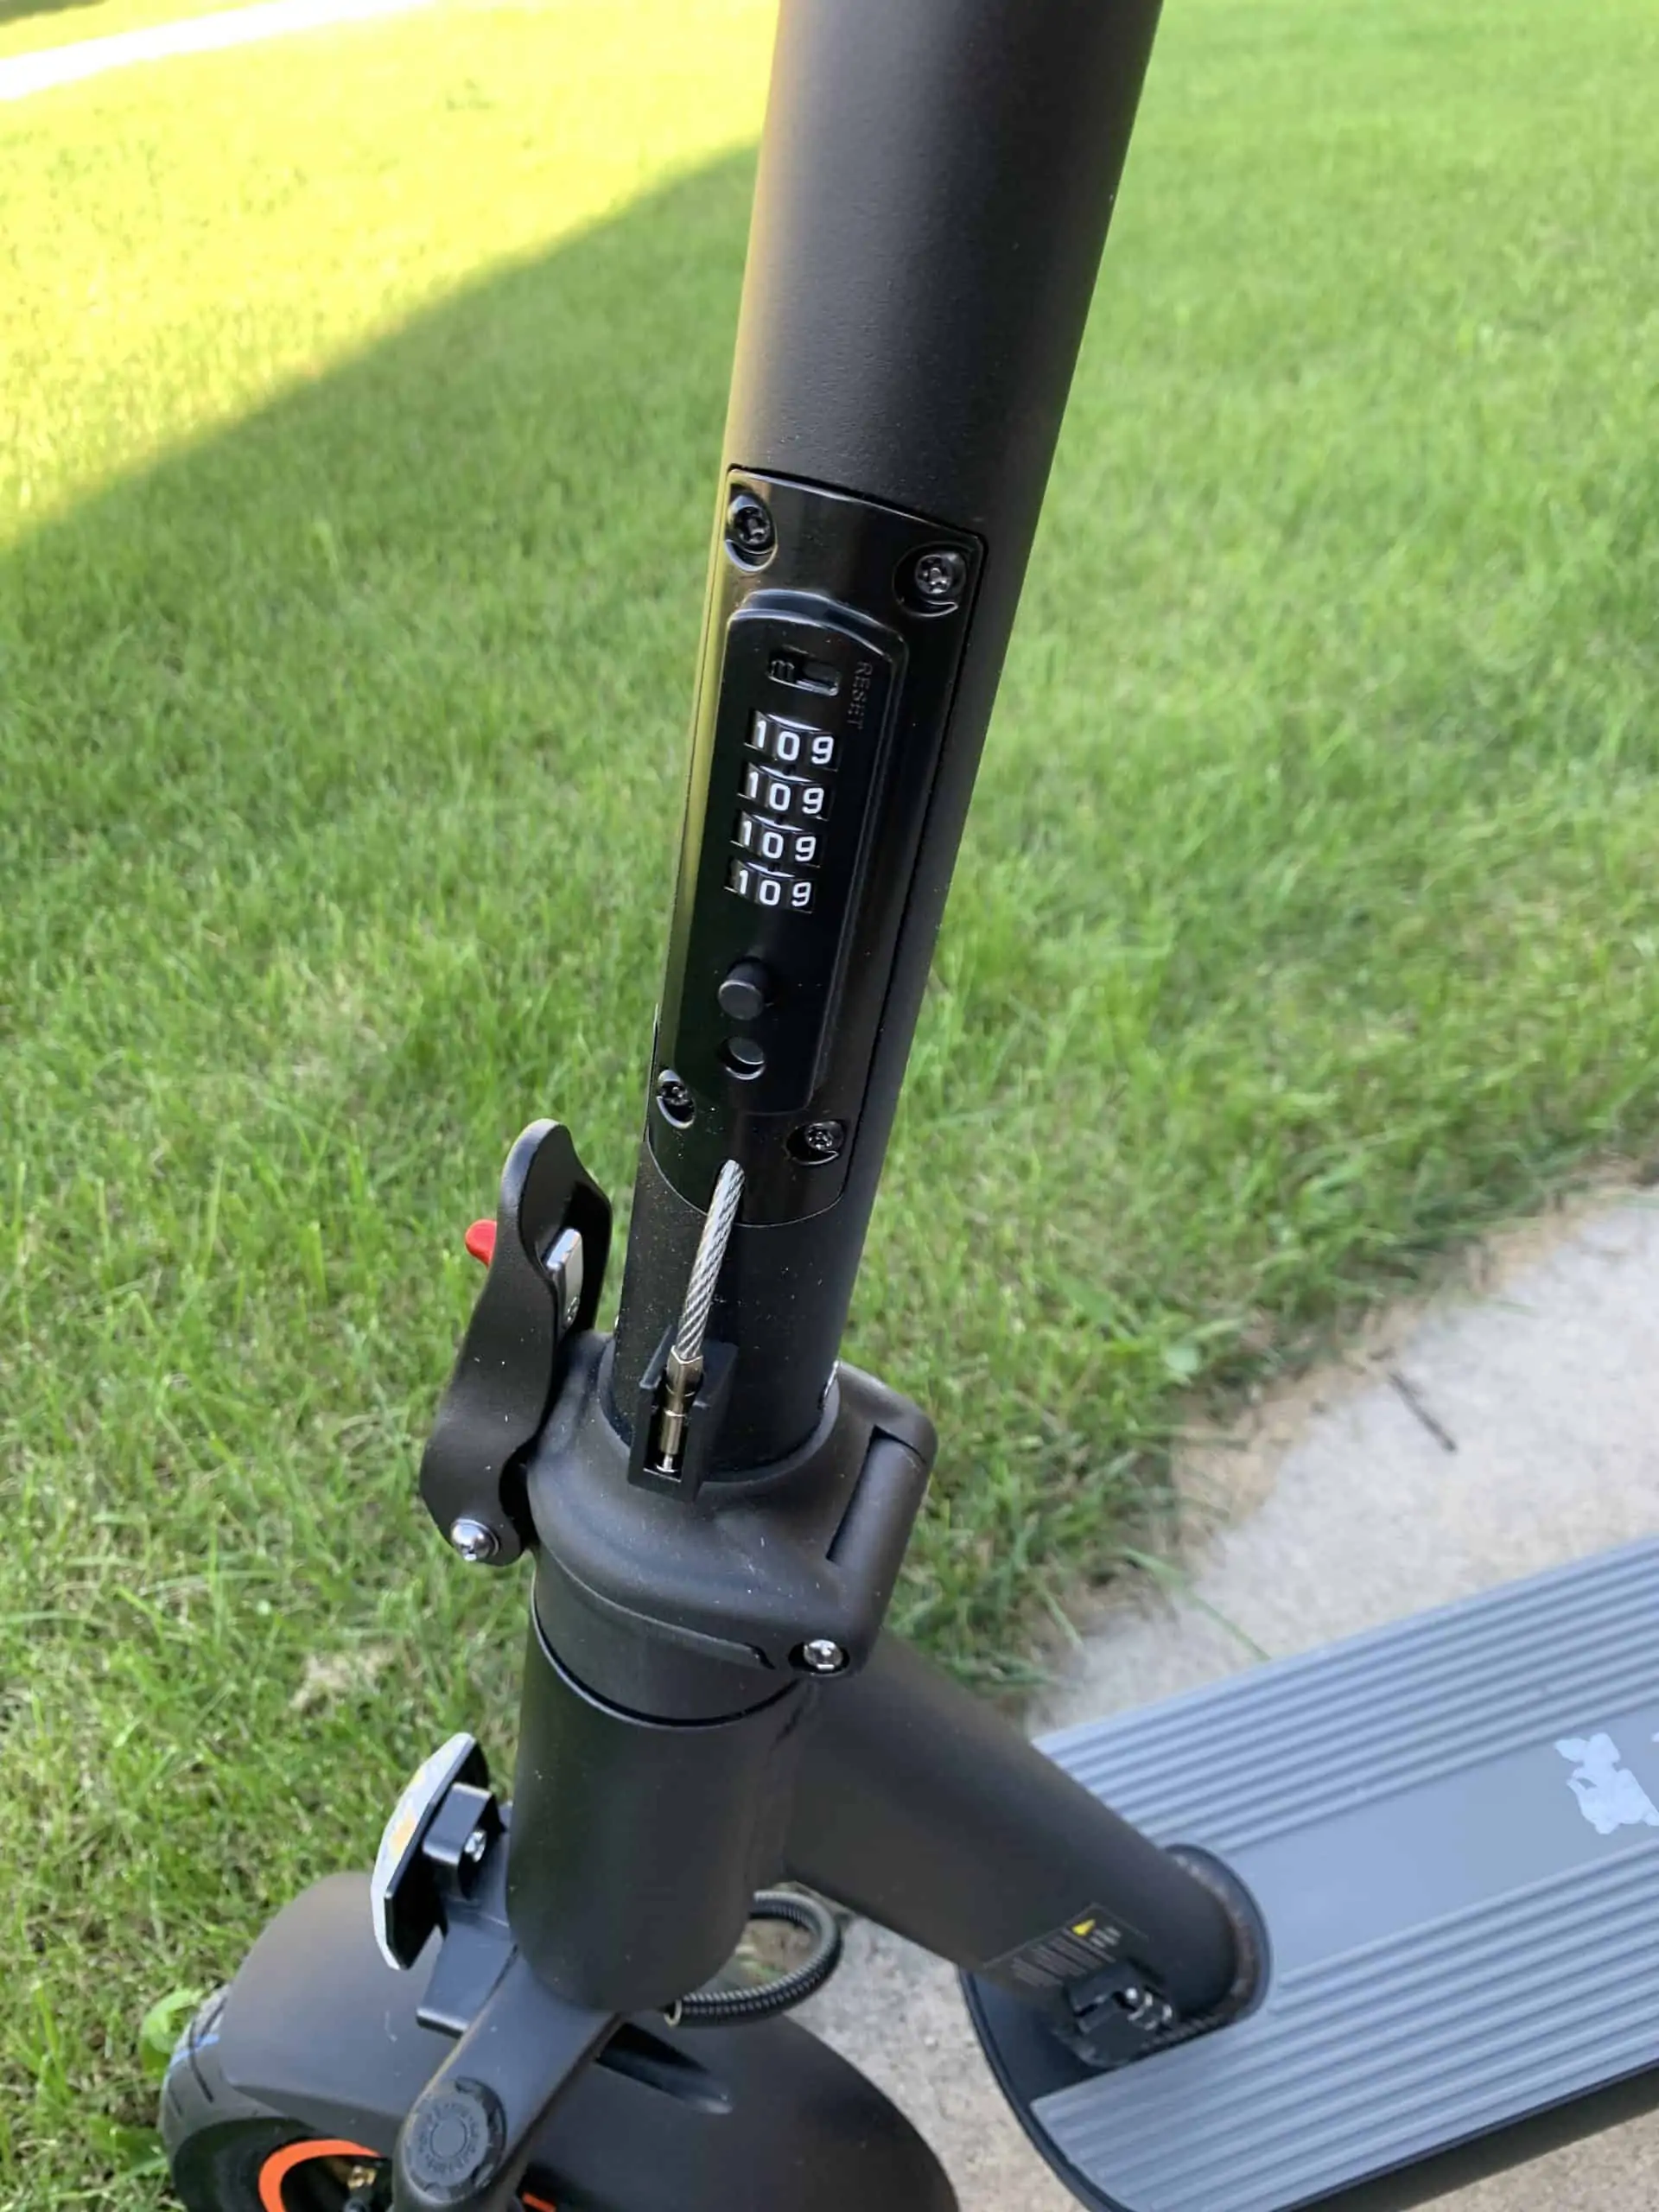 KIRIN G1 is the electric scooter's built-in anti-theft mechanisms.